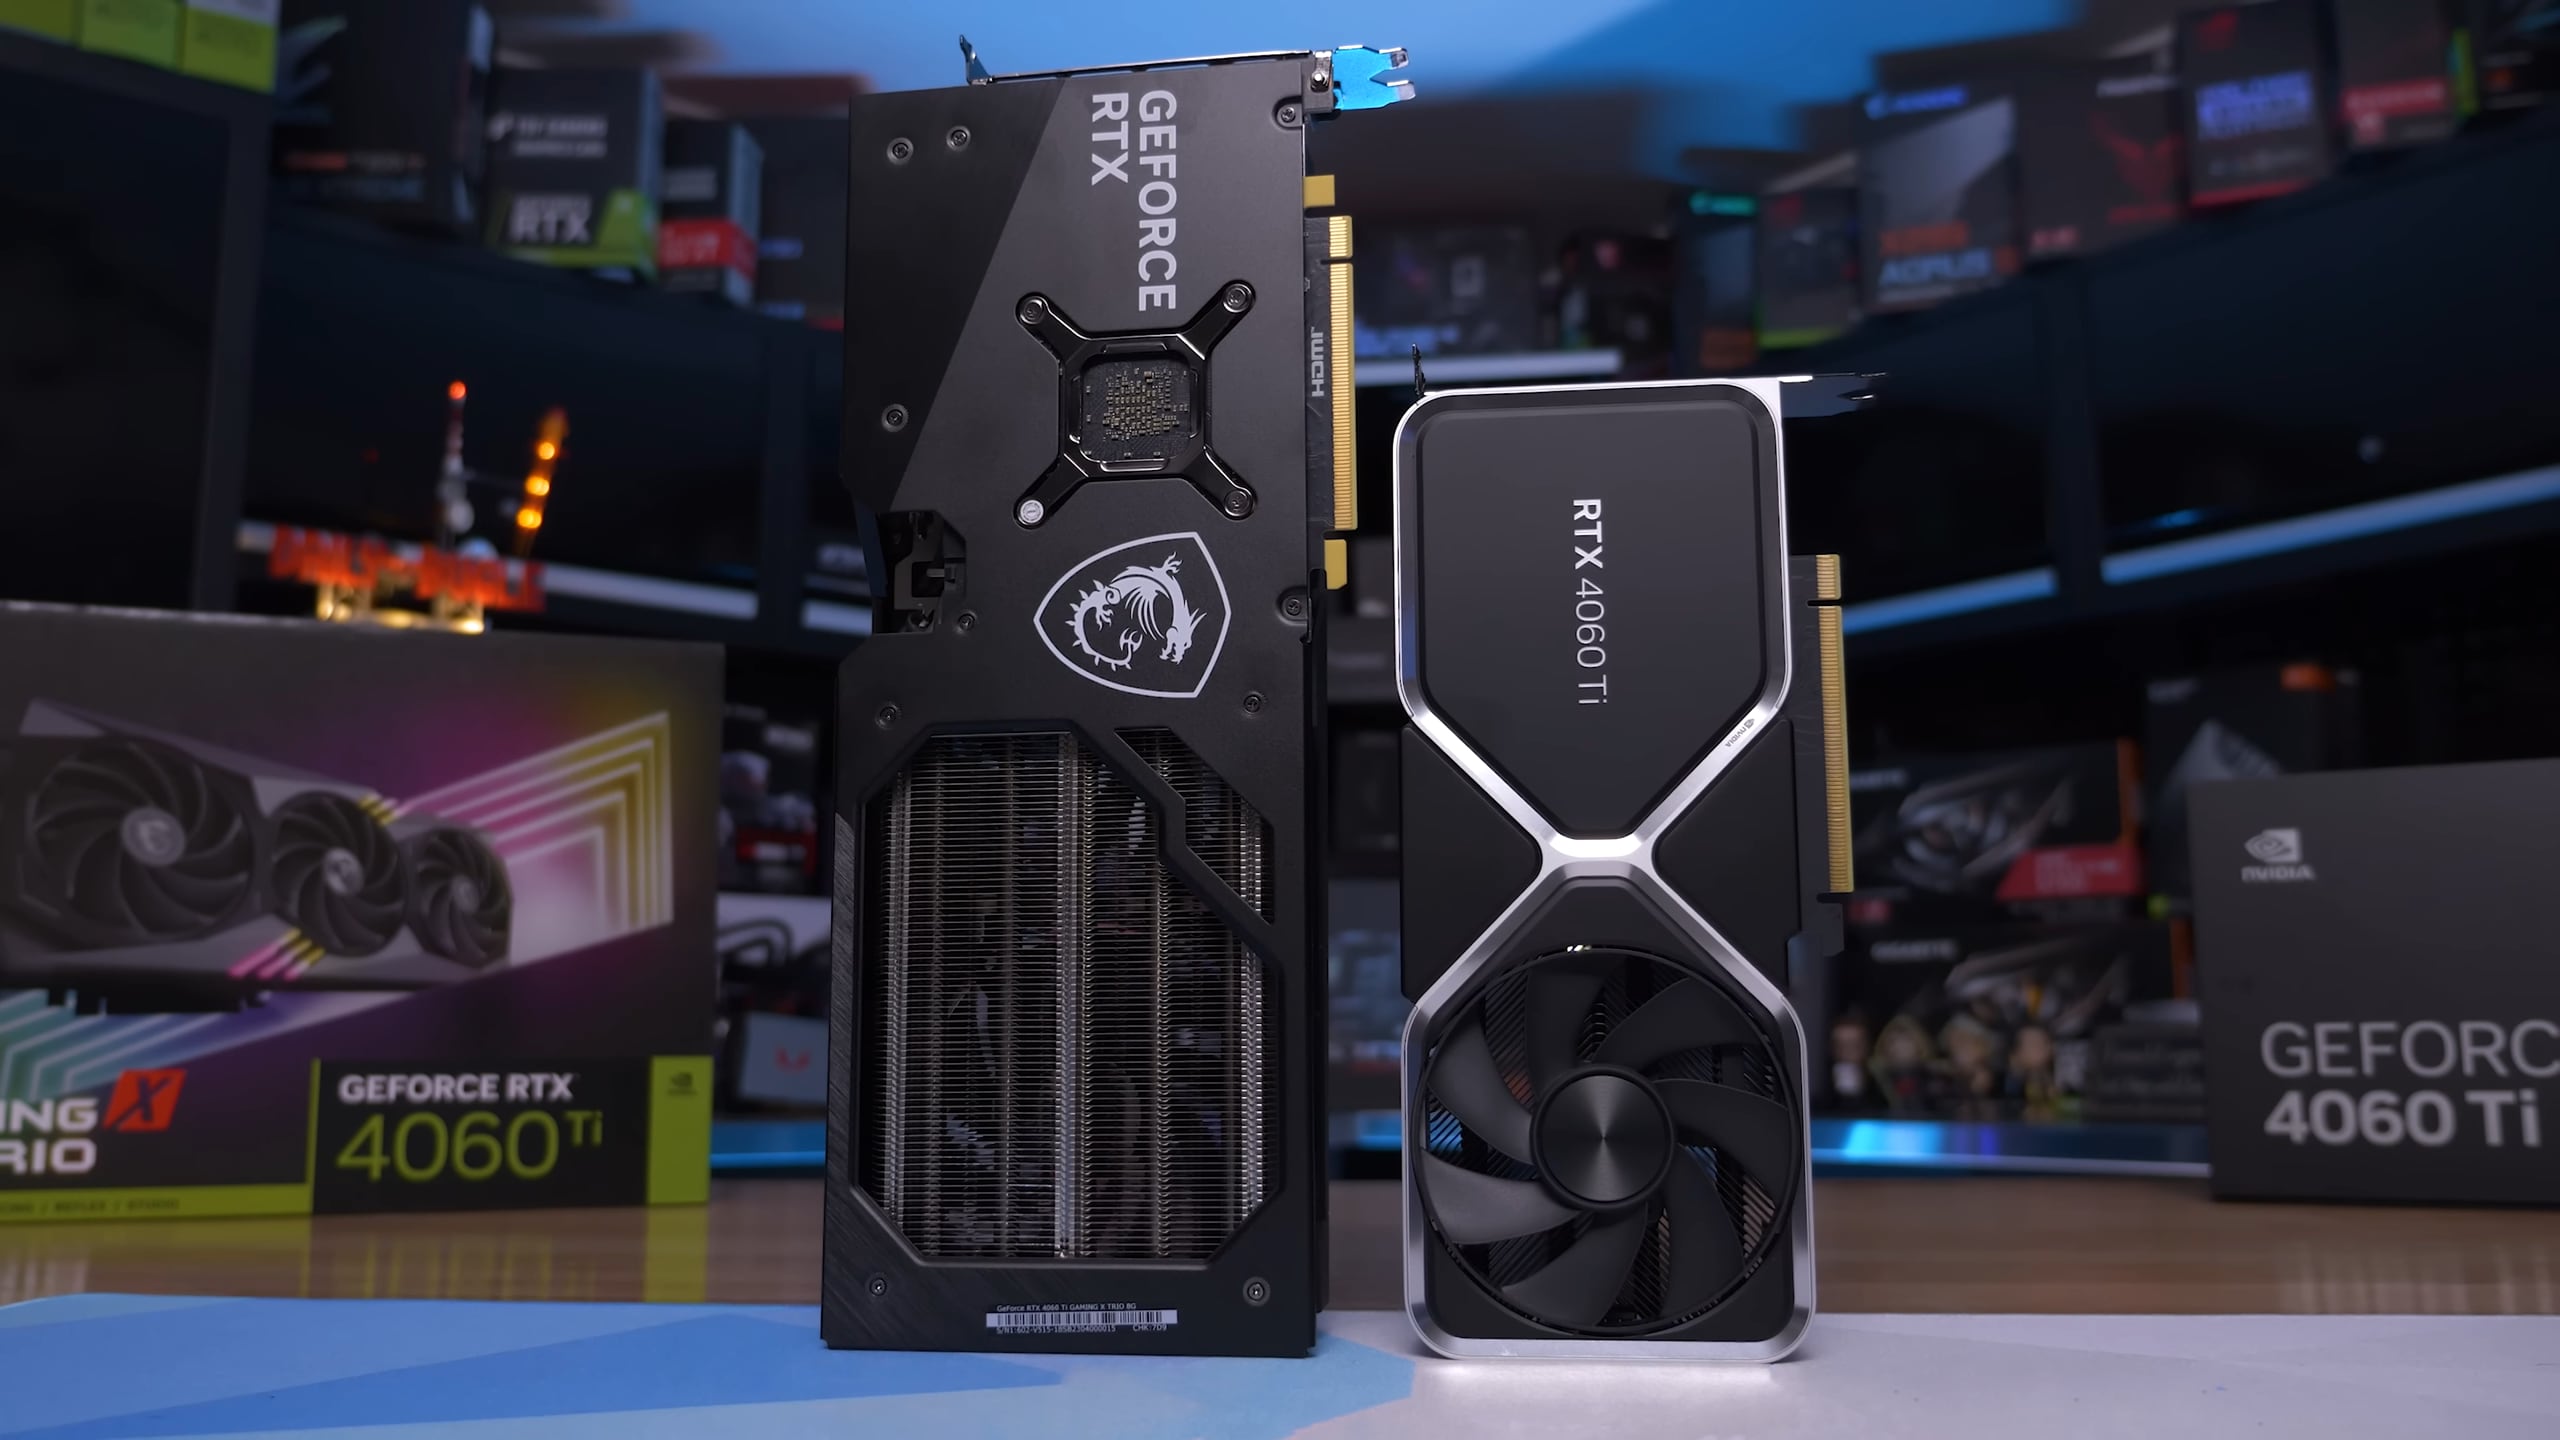 Adata Project NeonStorm SSD Has Self-Contained Water Cooling and Two Fans